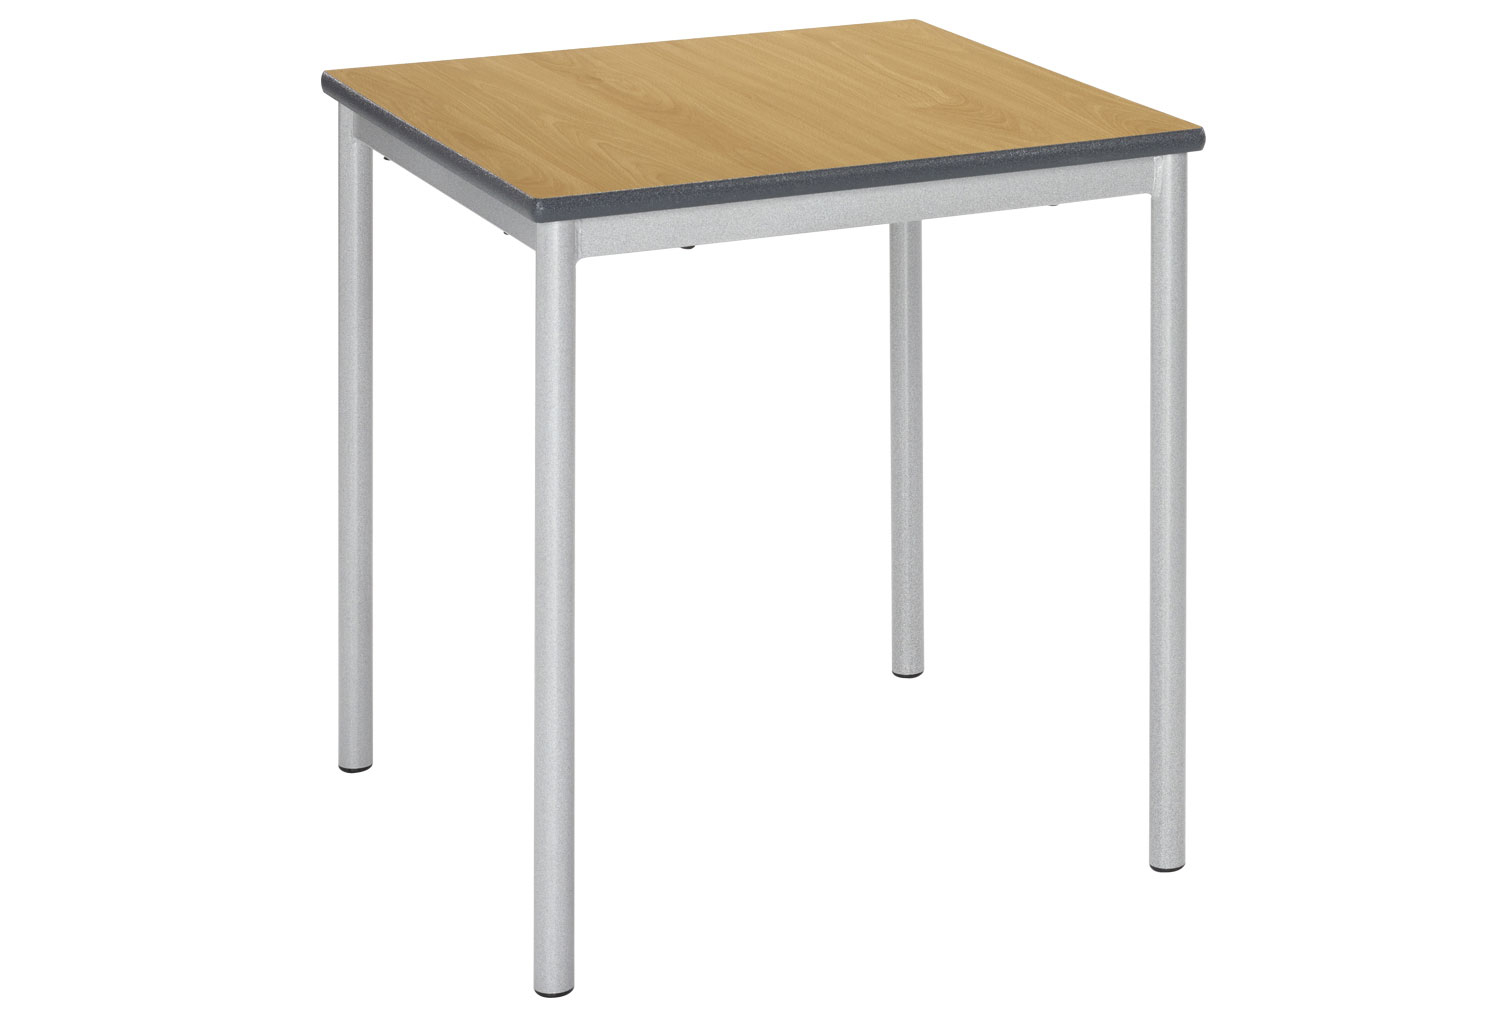 Qty 4 - RT32 Square Classroom Tables 14+ Years, 60wx60dx76h (cm), Speckled Grey Frame, Beech Top, MDF Beech Edge